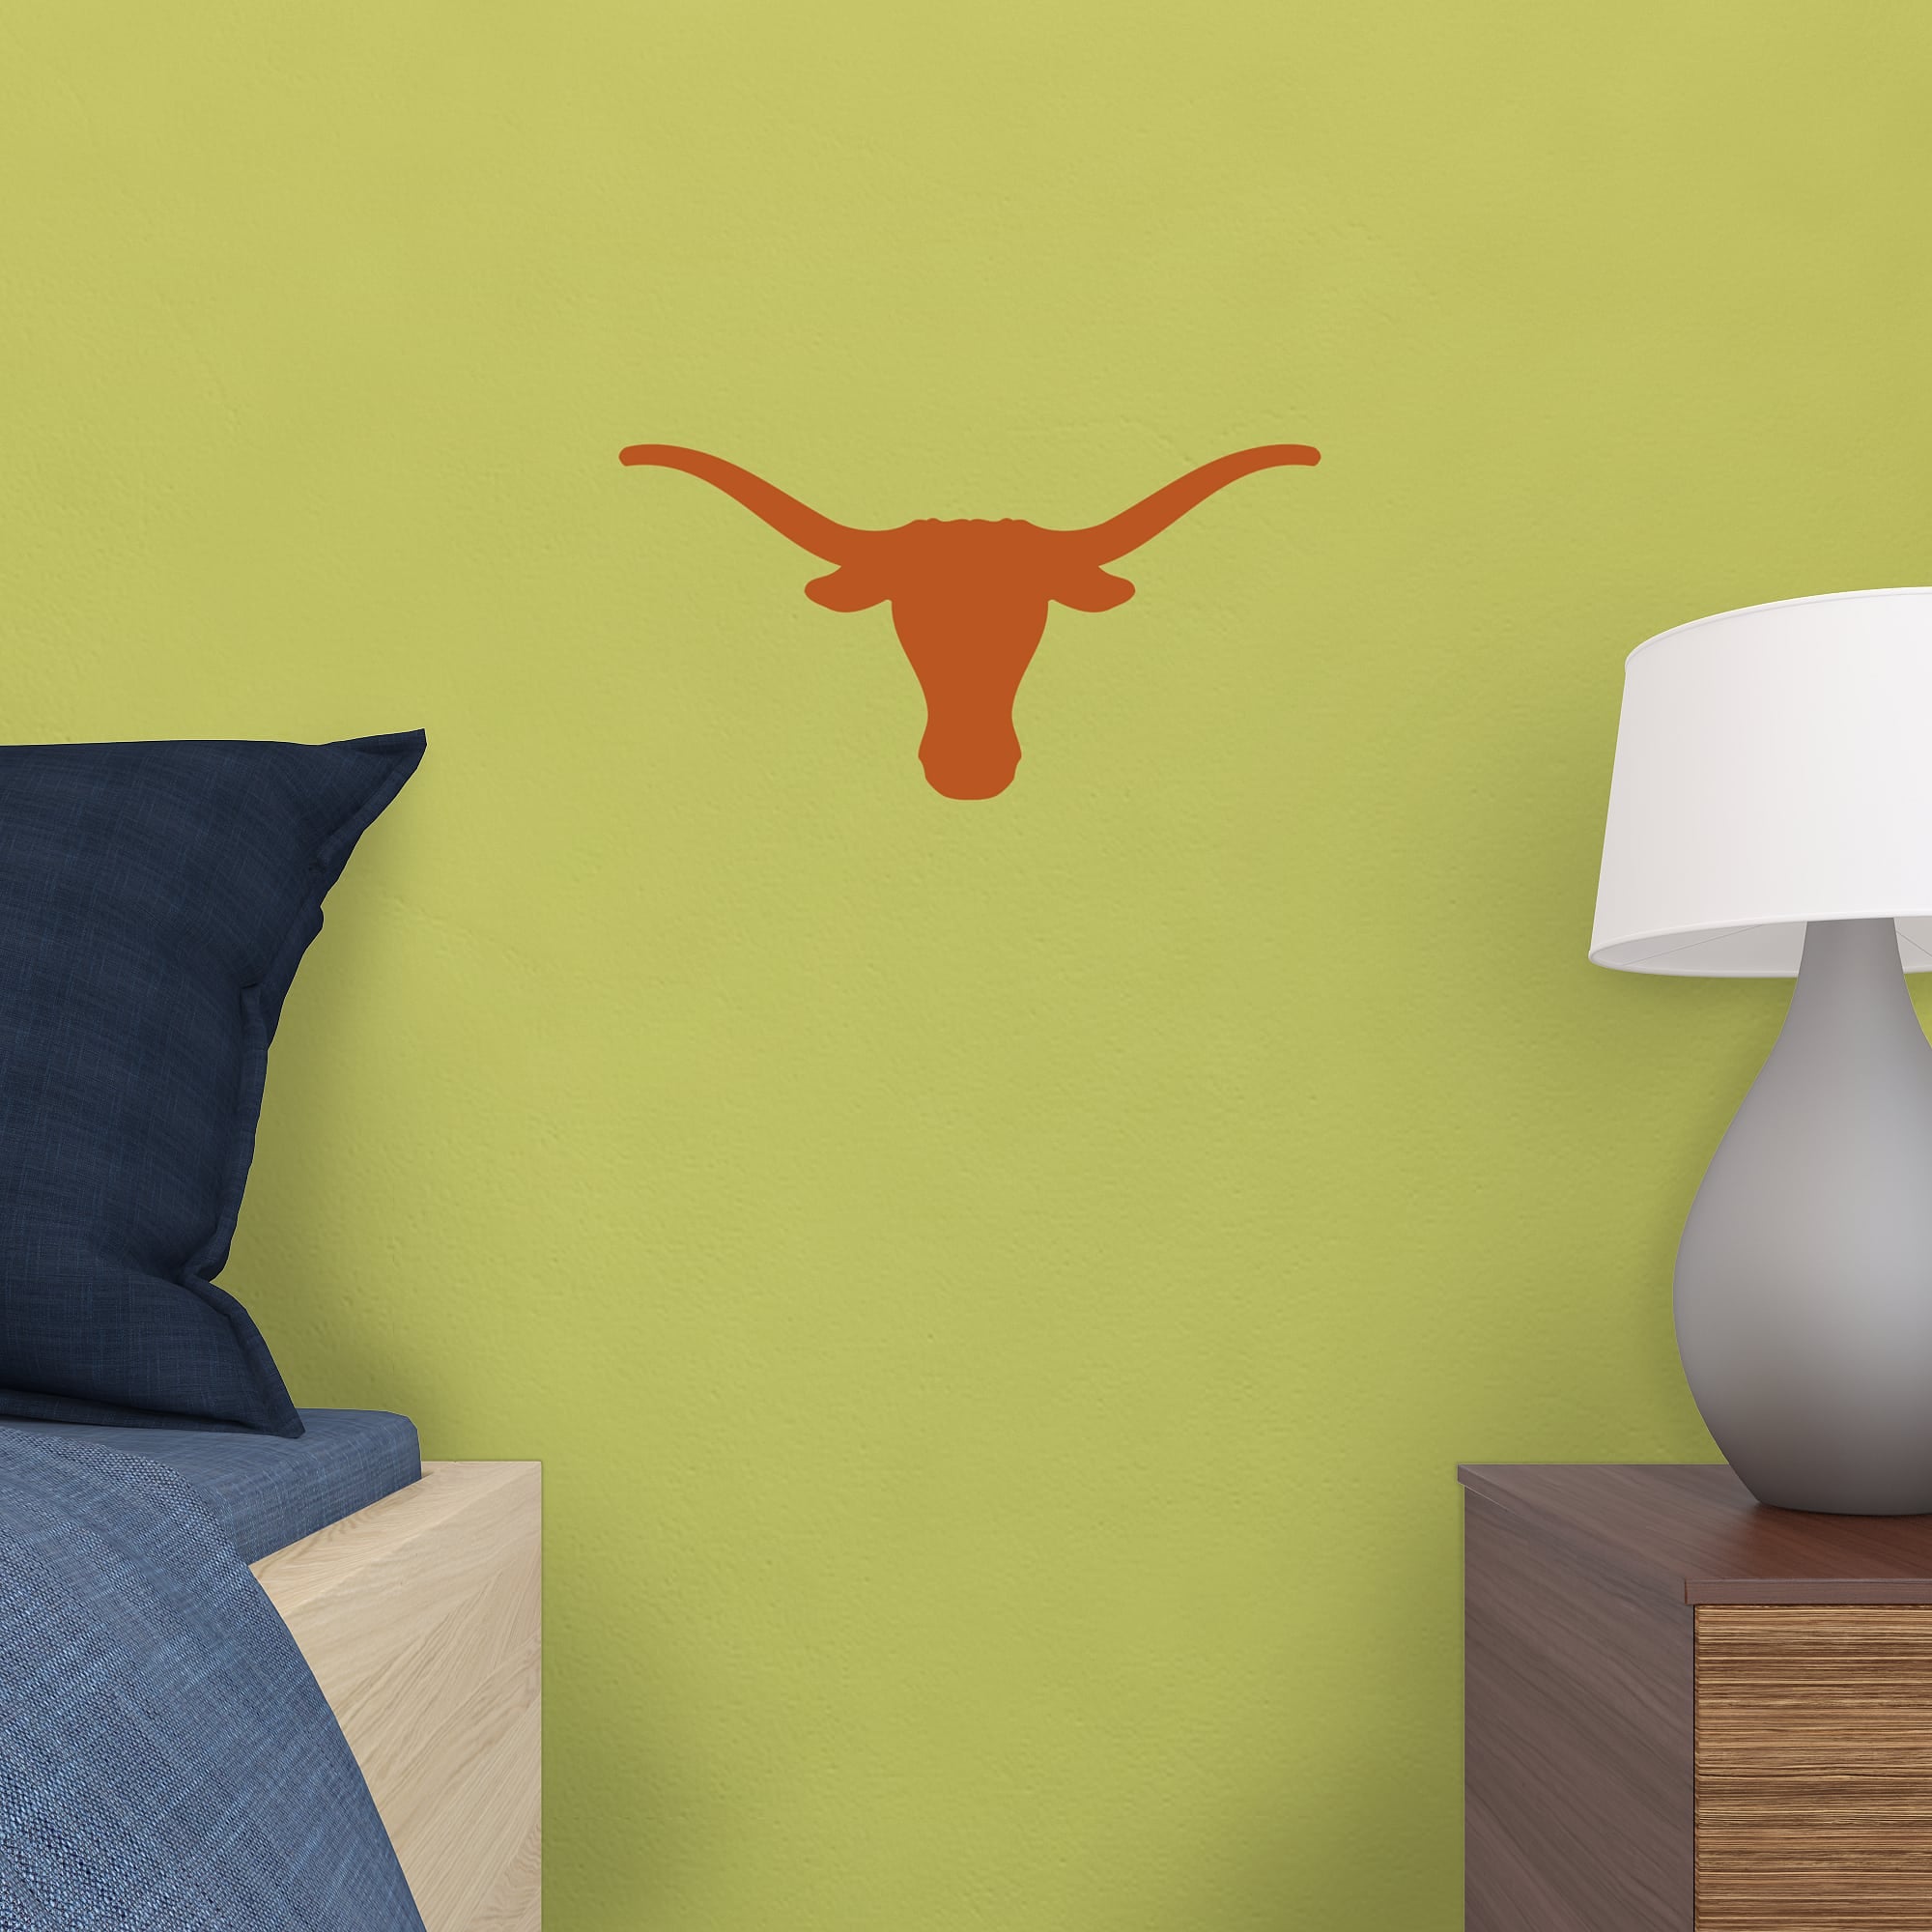 Texas Longhorns: Logo - Officially Licensed Removable Wall Decal 16.0"W x 8.0"H by Fathead | Vinyl